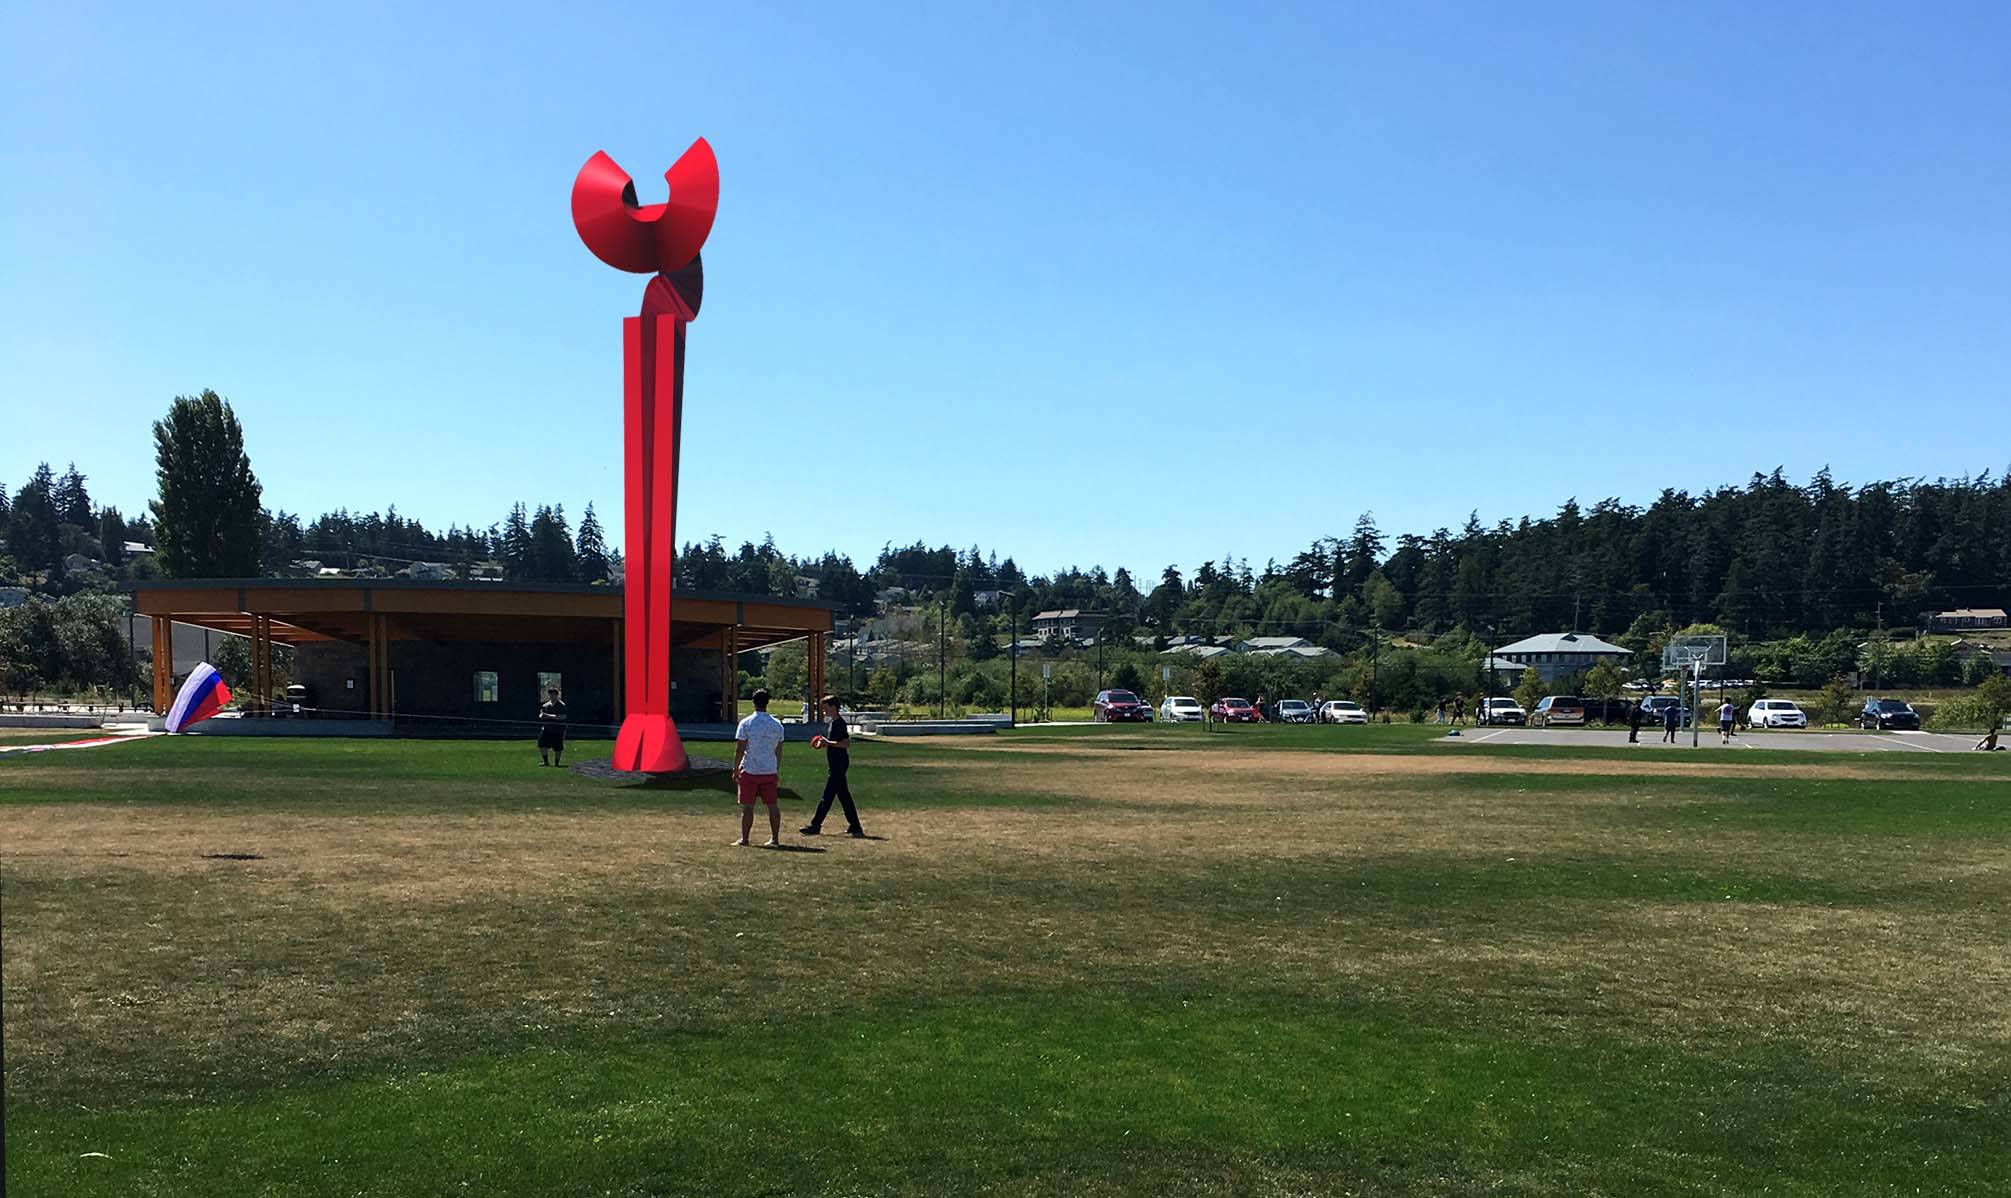 The ‘Angel de la Creatividad’ sculpture is currently bright red, but it is unknown whether it will stay that color if it is installed in Oak Harbor. Rendering provided